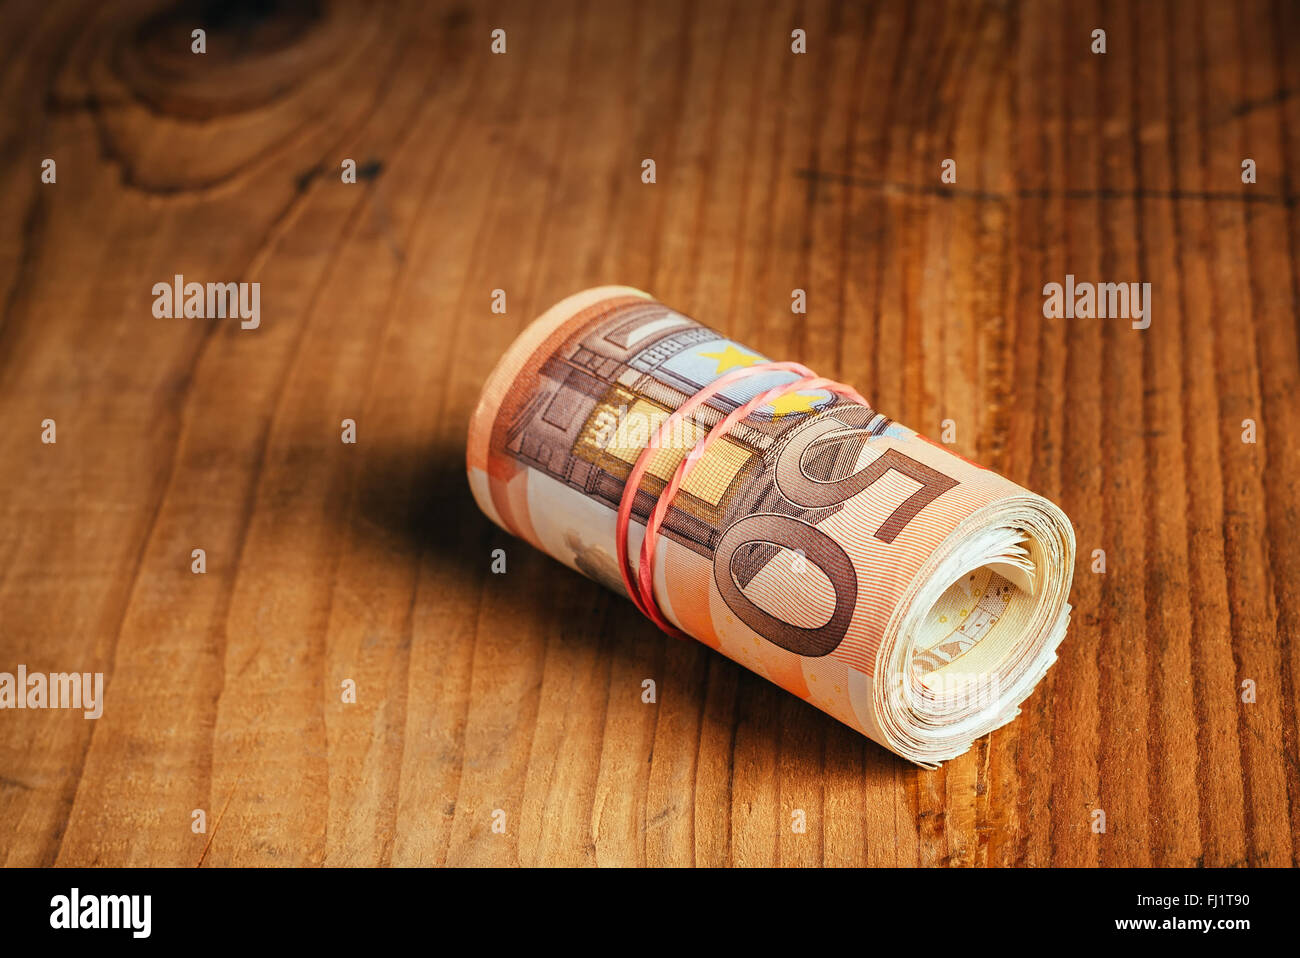 Saving money concept, rolled up cash money with rubber band on wooden desk, fifty euro banknotes personal home budget stack Stock Photo